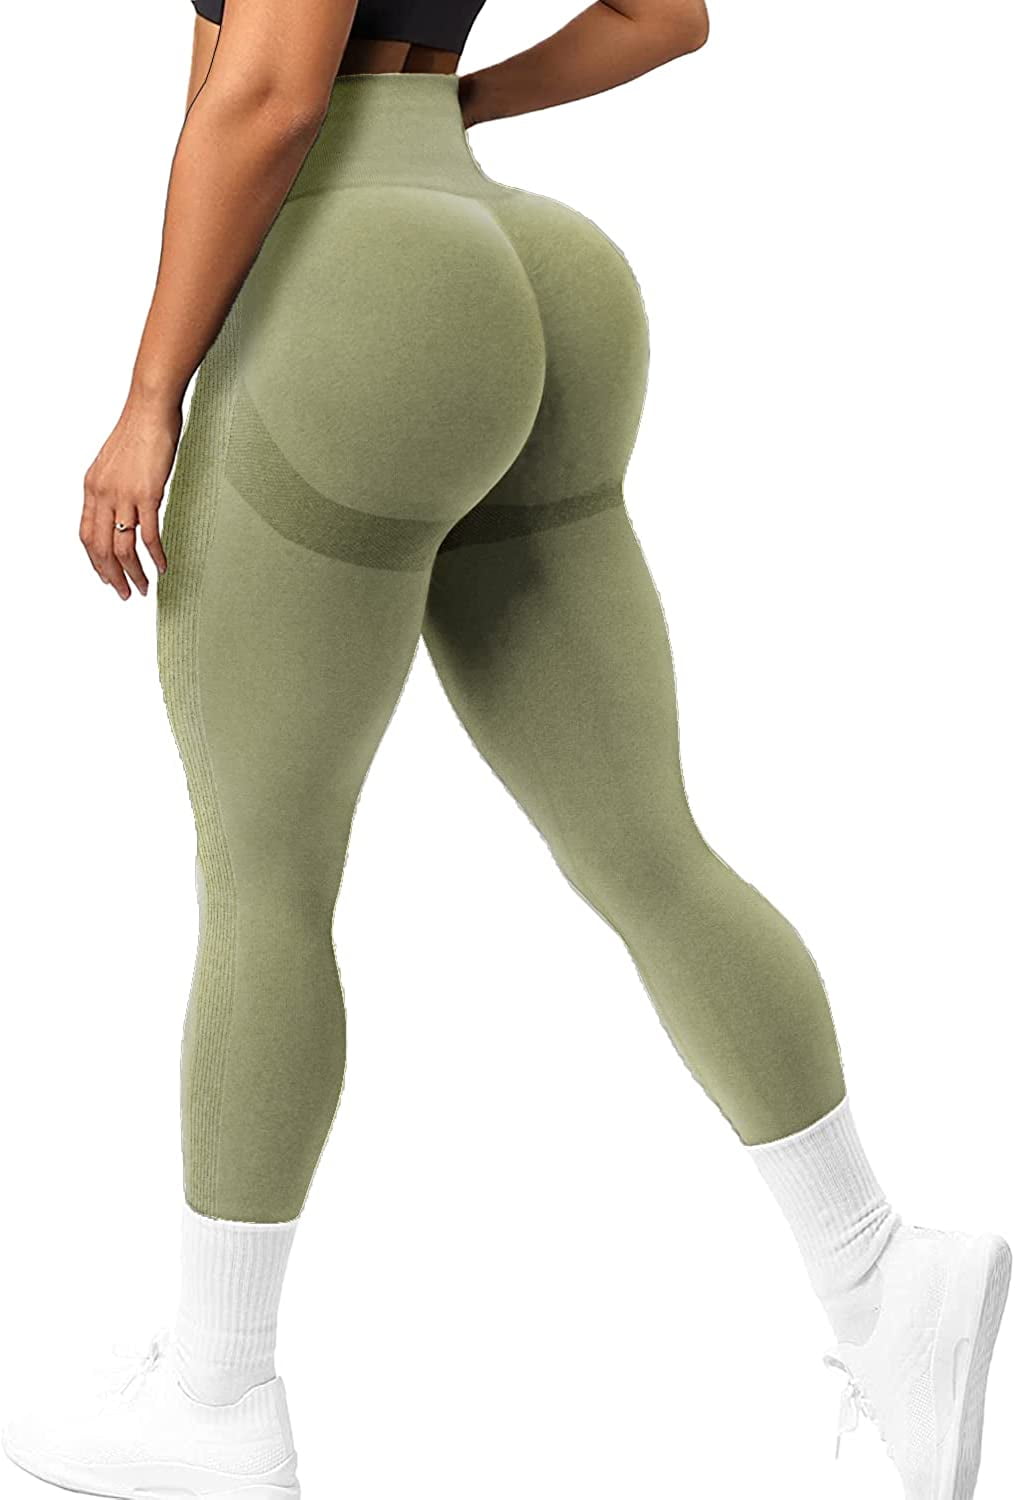 Buy POWERASIA High Waisted Yoga Pants for Women Butt Lift Ruched Scrunch  Butt Leggings Workout Tummy Control Booty Tights at